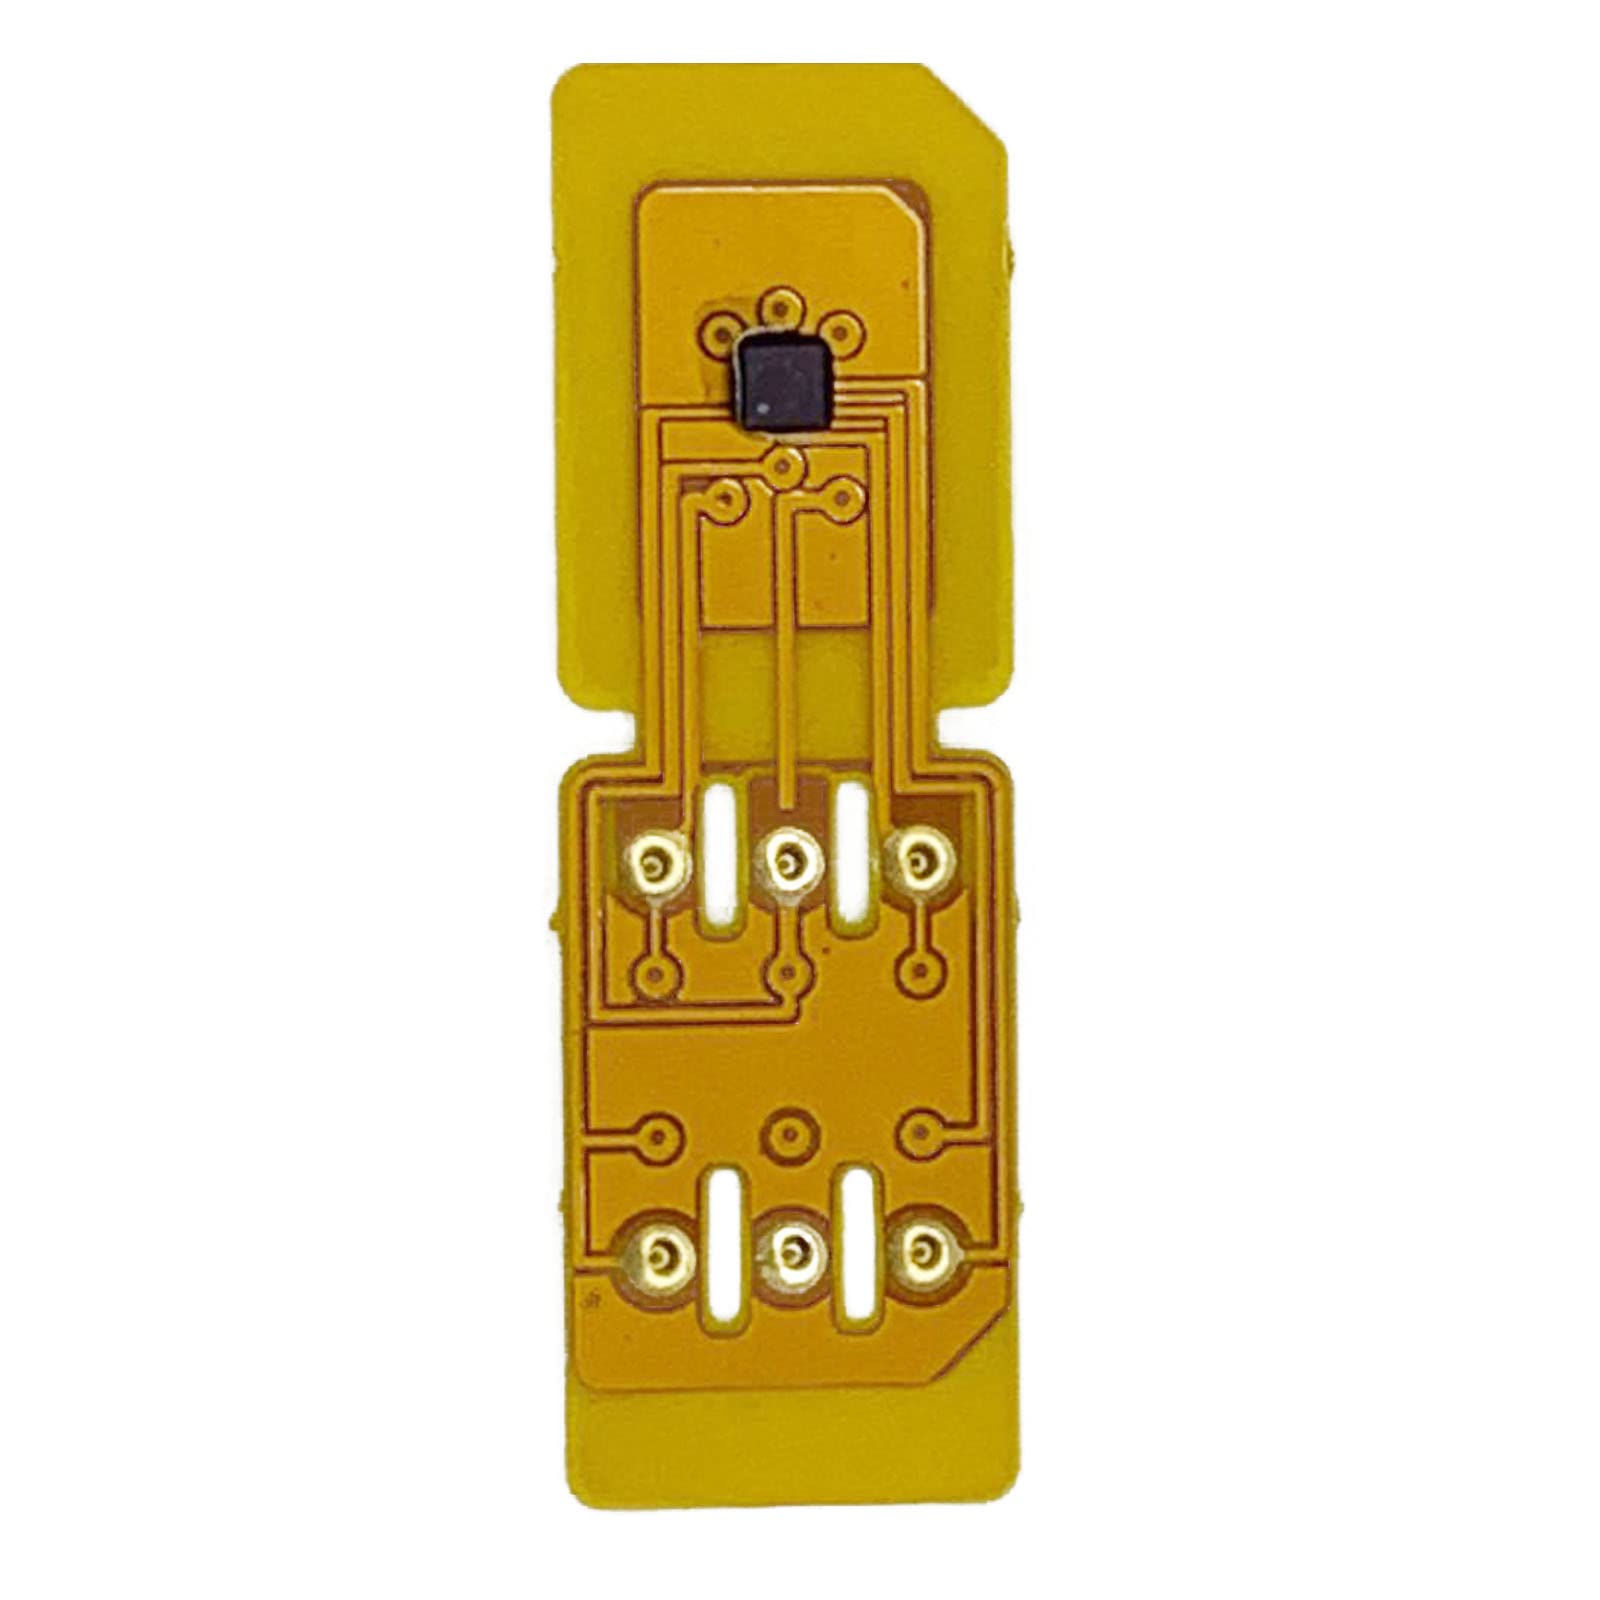 Usim 4GPro Unlock SIM-Card for Phone13 12 11 Smart-Decodable Chip to SIM-Cards Cellphone Accessories